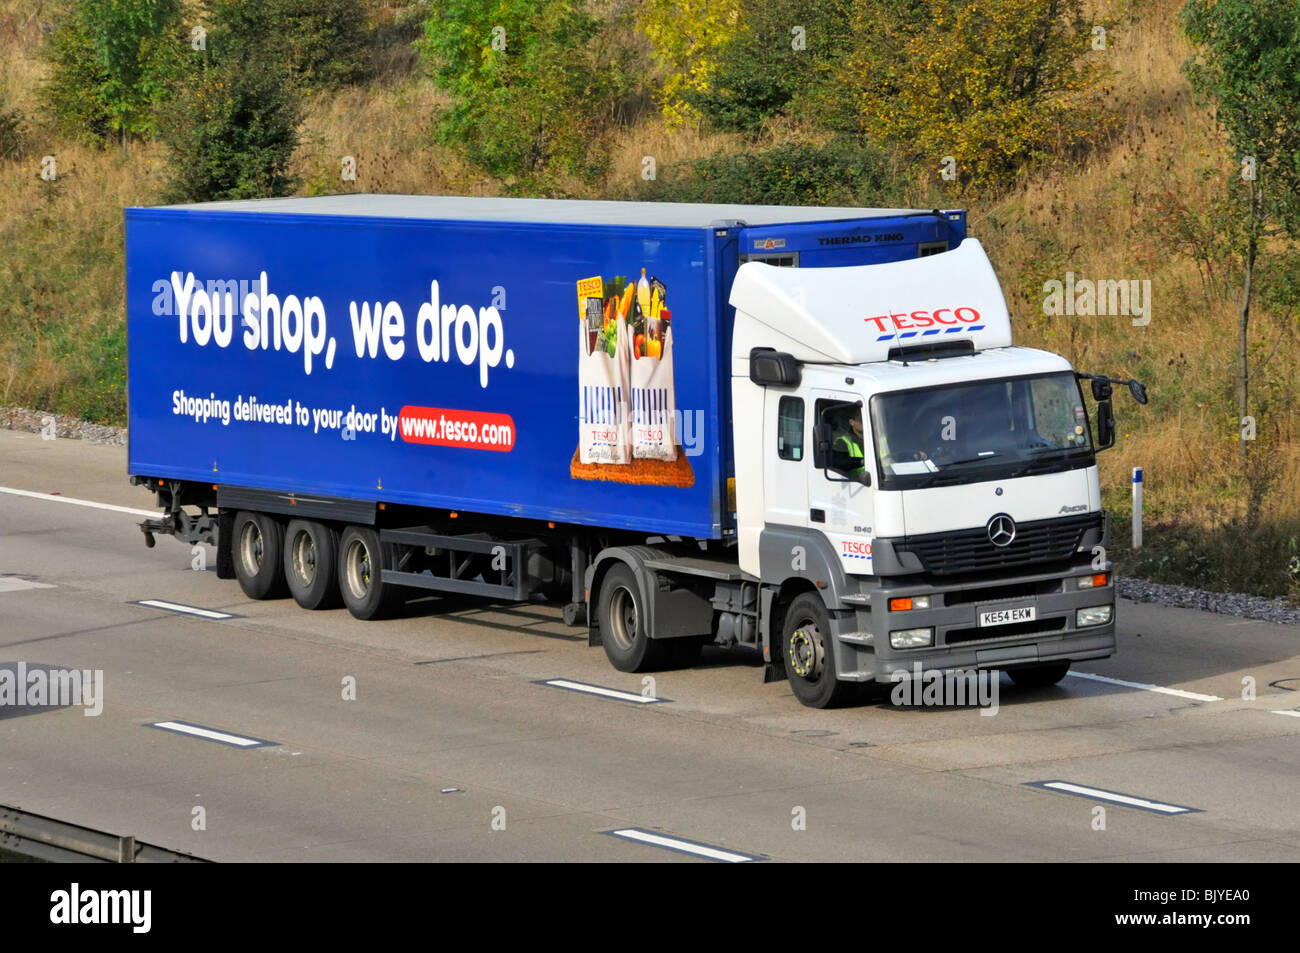 Hgv supermarket food supply chain store grocery delivery lorry truck with trailer advertising Tesco food business driving on UK motorway Stock Photo